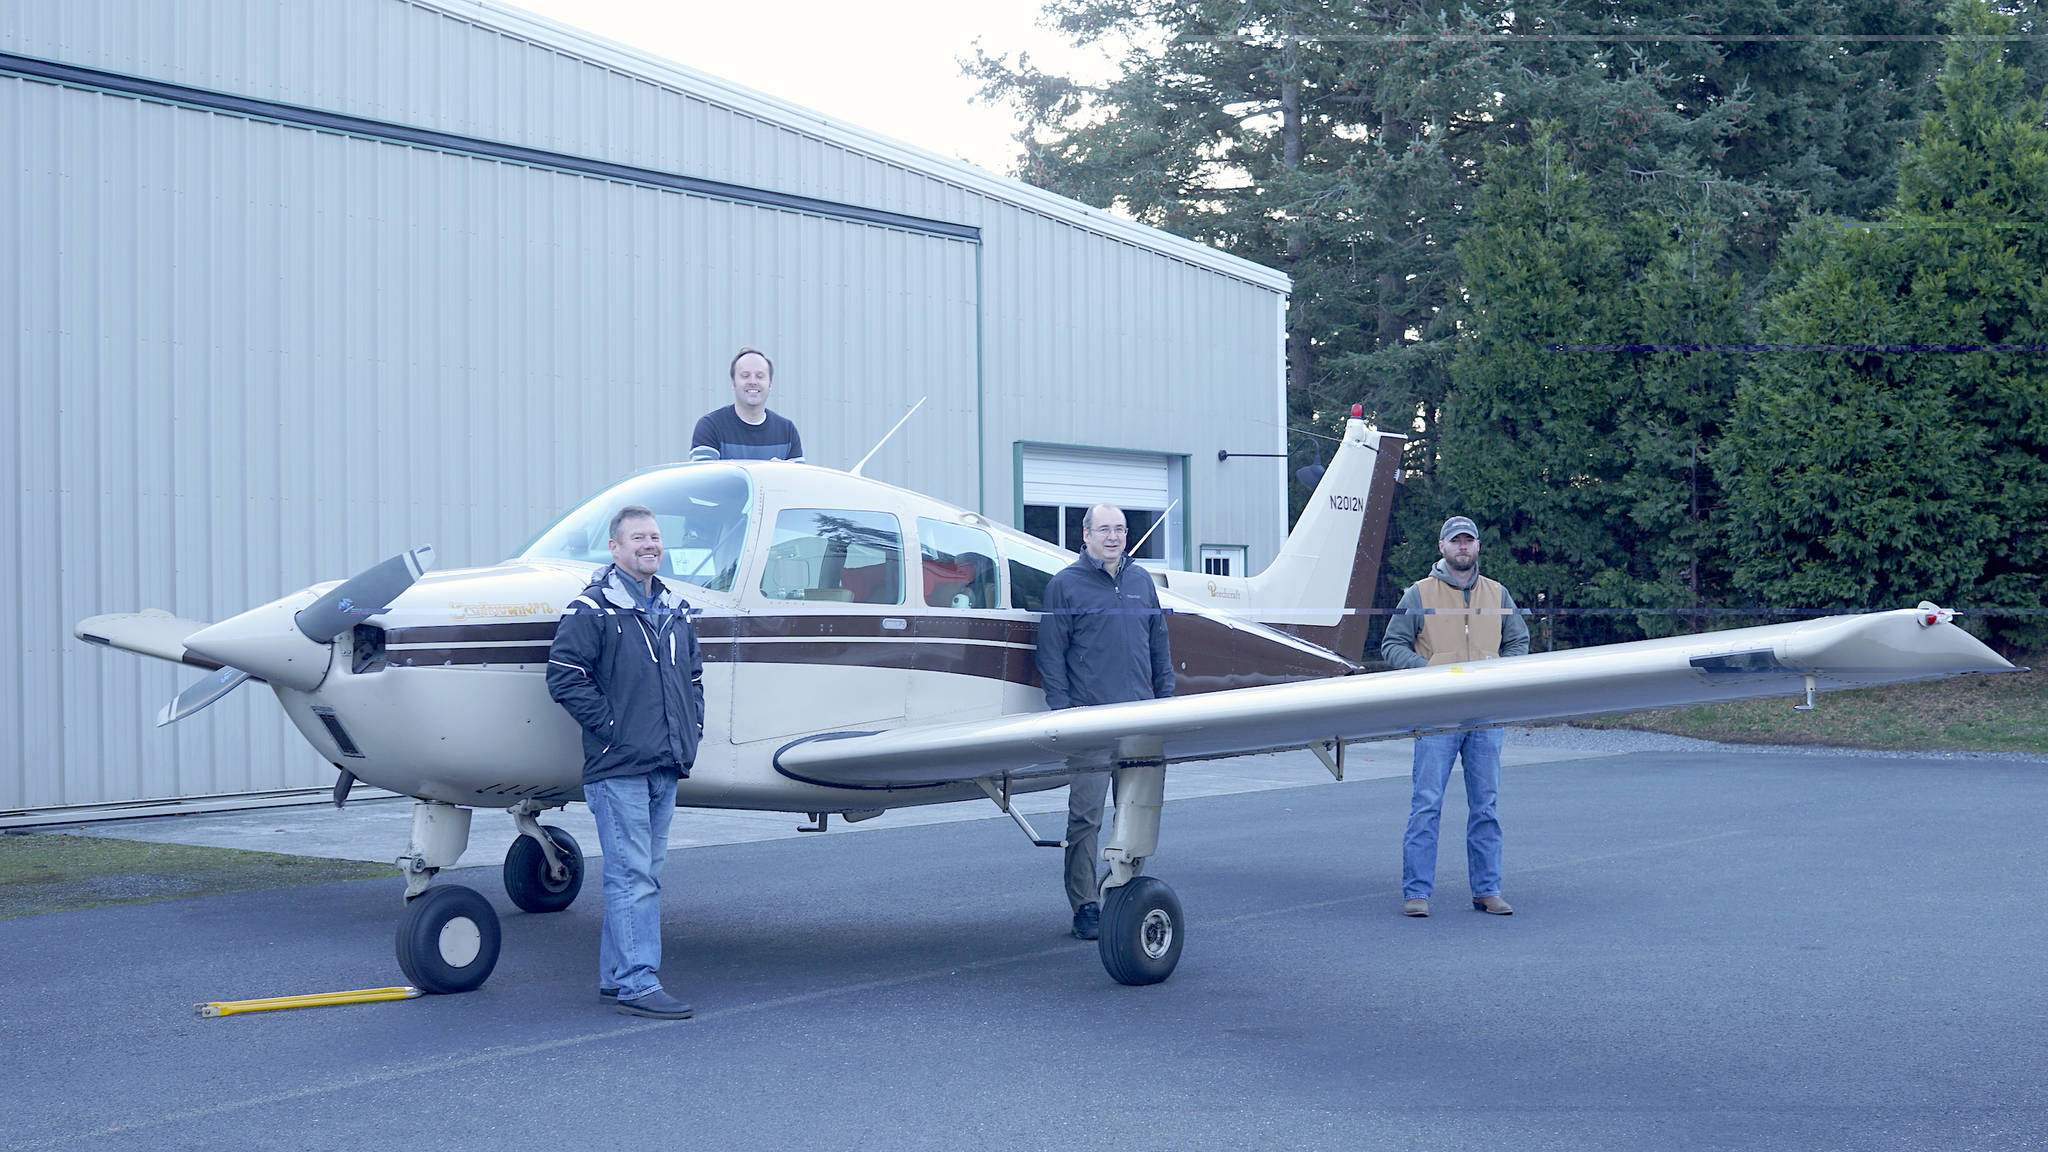 Laura Kussman/Staff photo
From right to left: Tony Simpson, David Billings, David Janecek and Ken Loock stand with the Airhawks Flight Club airplane — a 1993 Beechcraft Sundowner purchased in the summer of 2019 to provide more training options for student pilots and increases flying opportunities for current pilots.